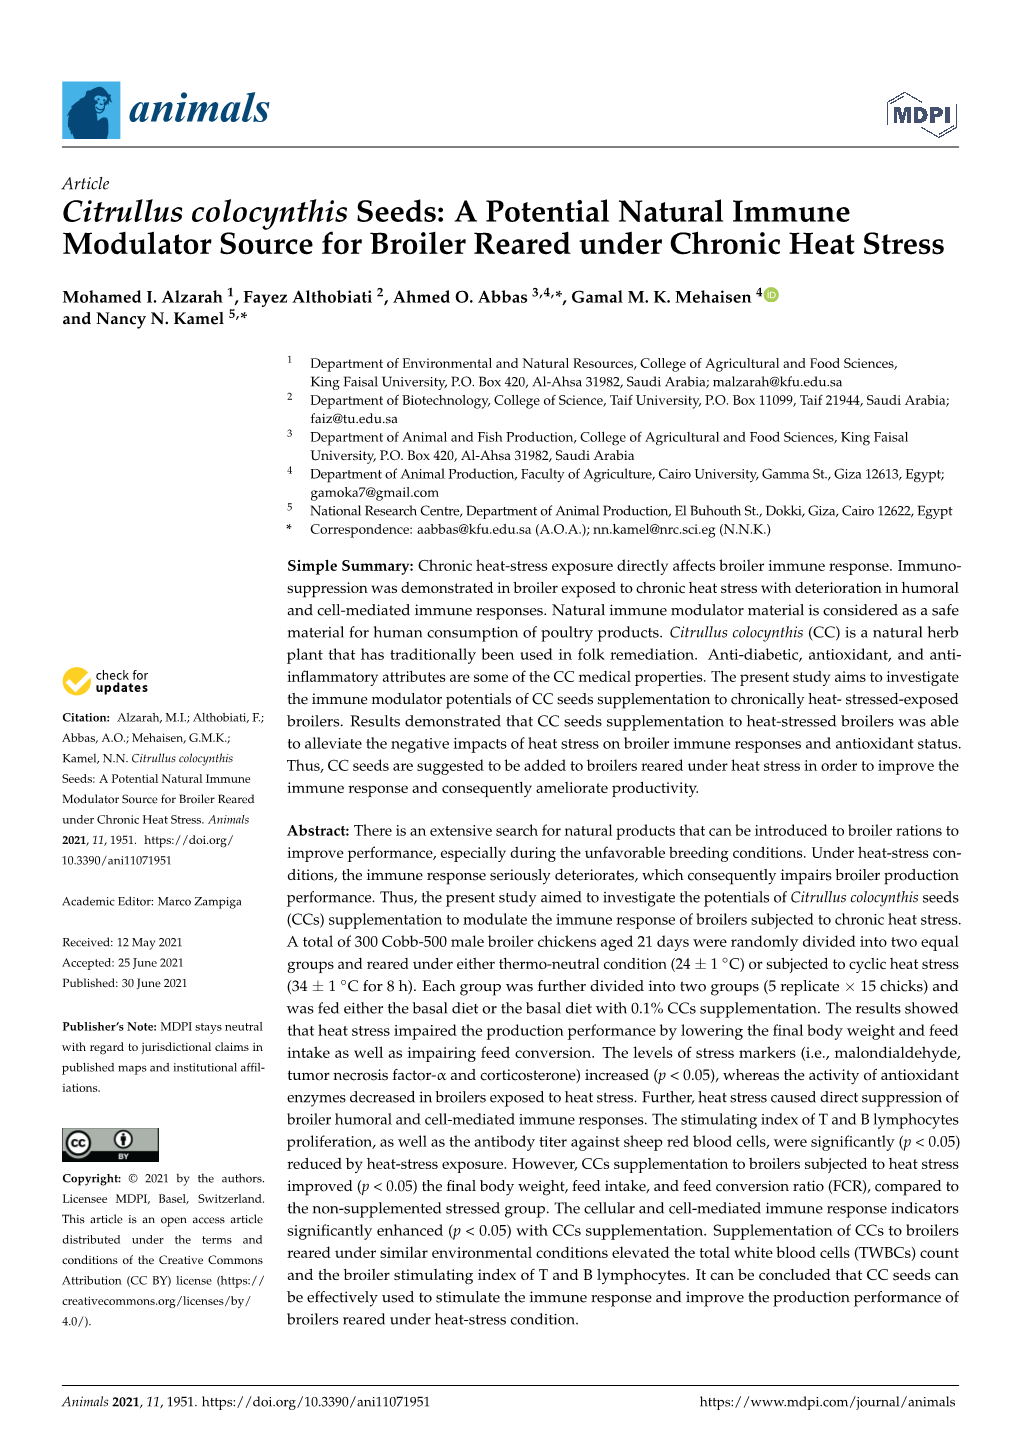 Citrullus Colocynthis Seeds: a Potential Natural Immune Modulator Source for Broiler Reared Under Chronic Heat Stress